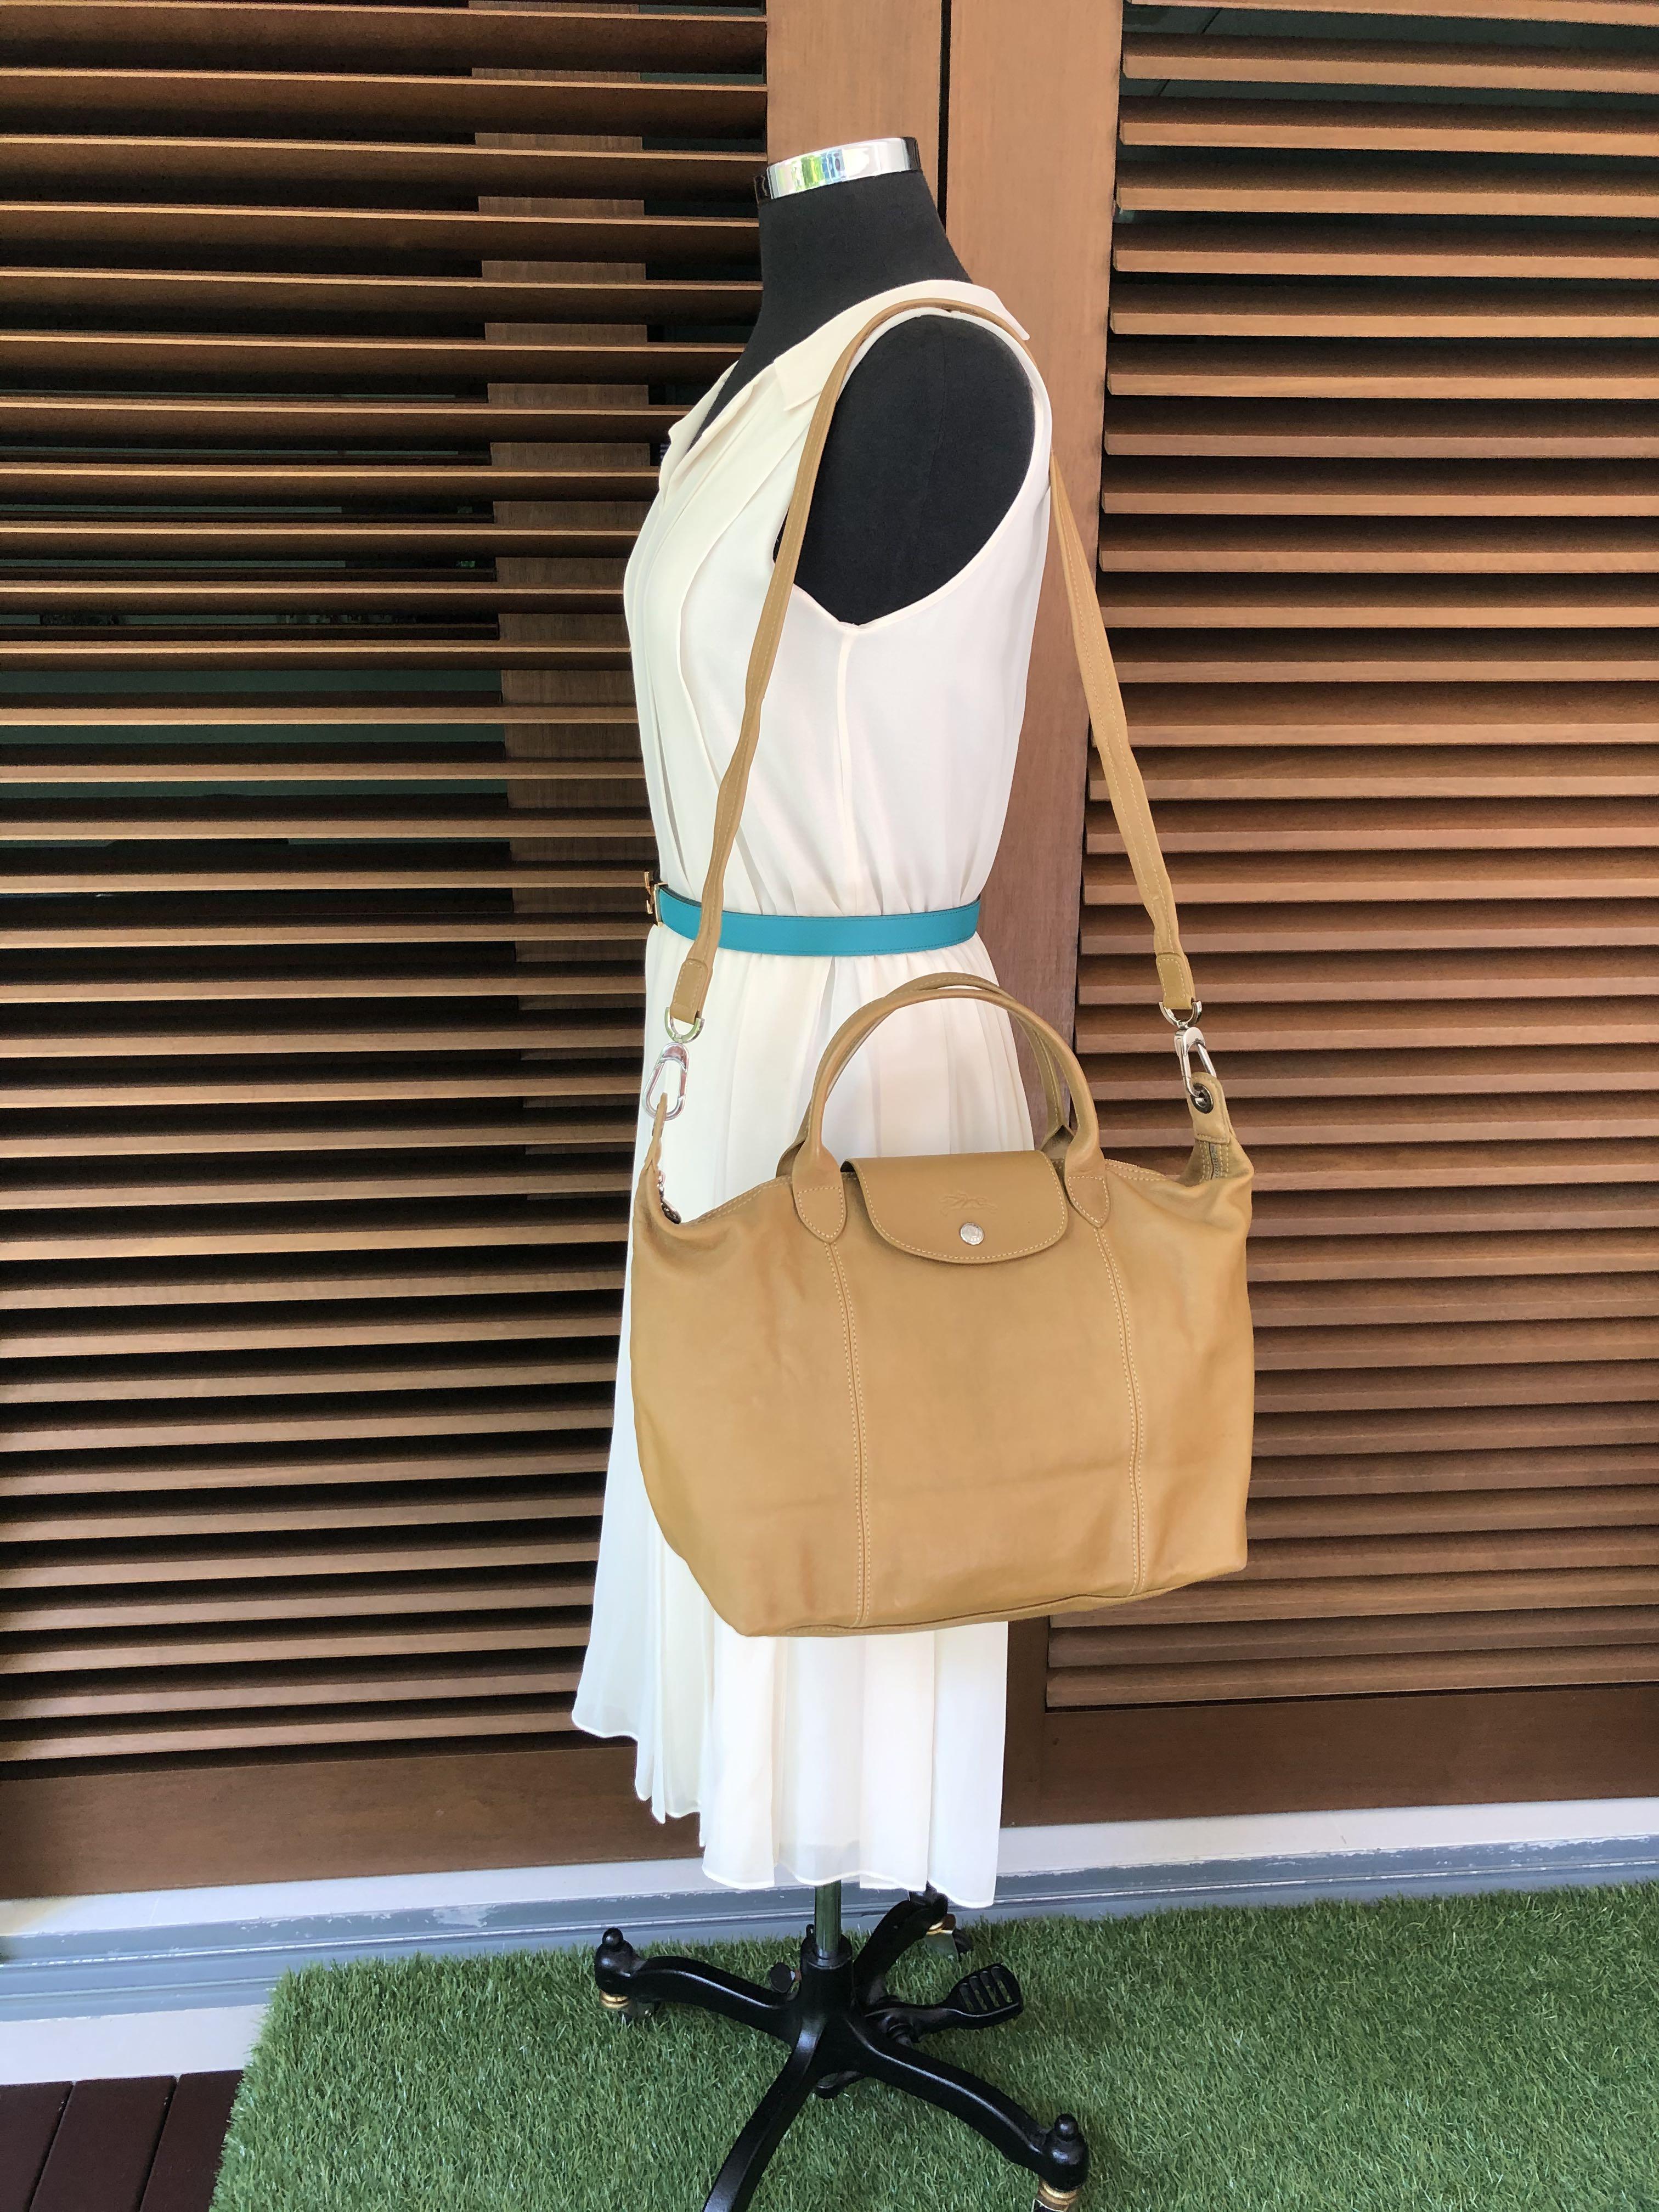 Authentic Longchamp Bag Le Pliage Cuir Leather in Honey Mustard